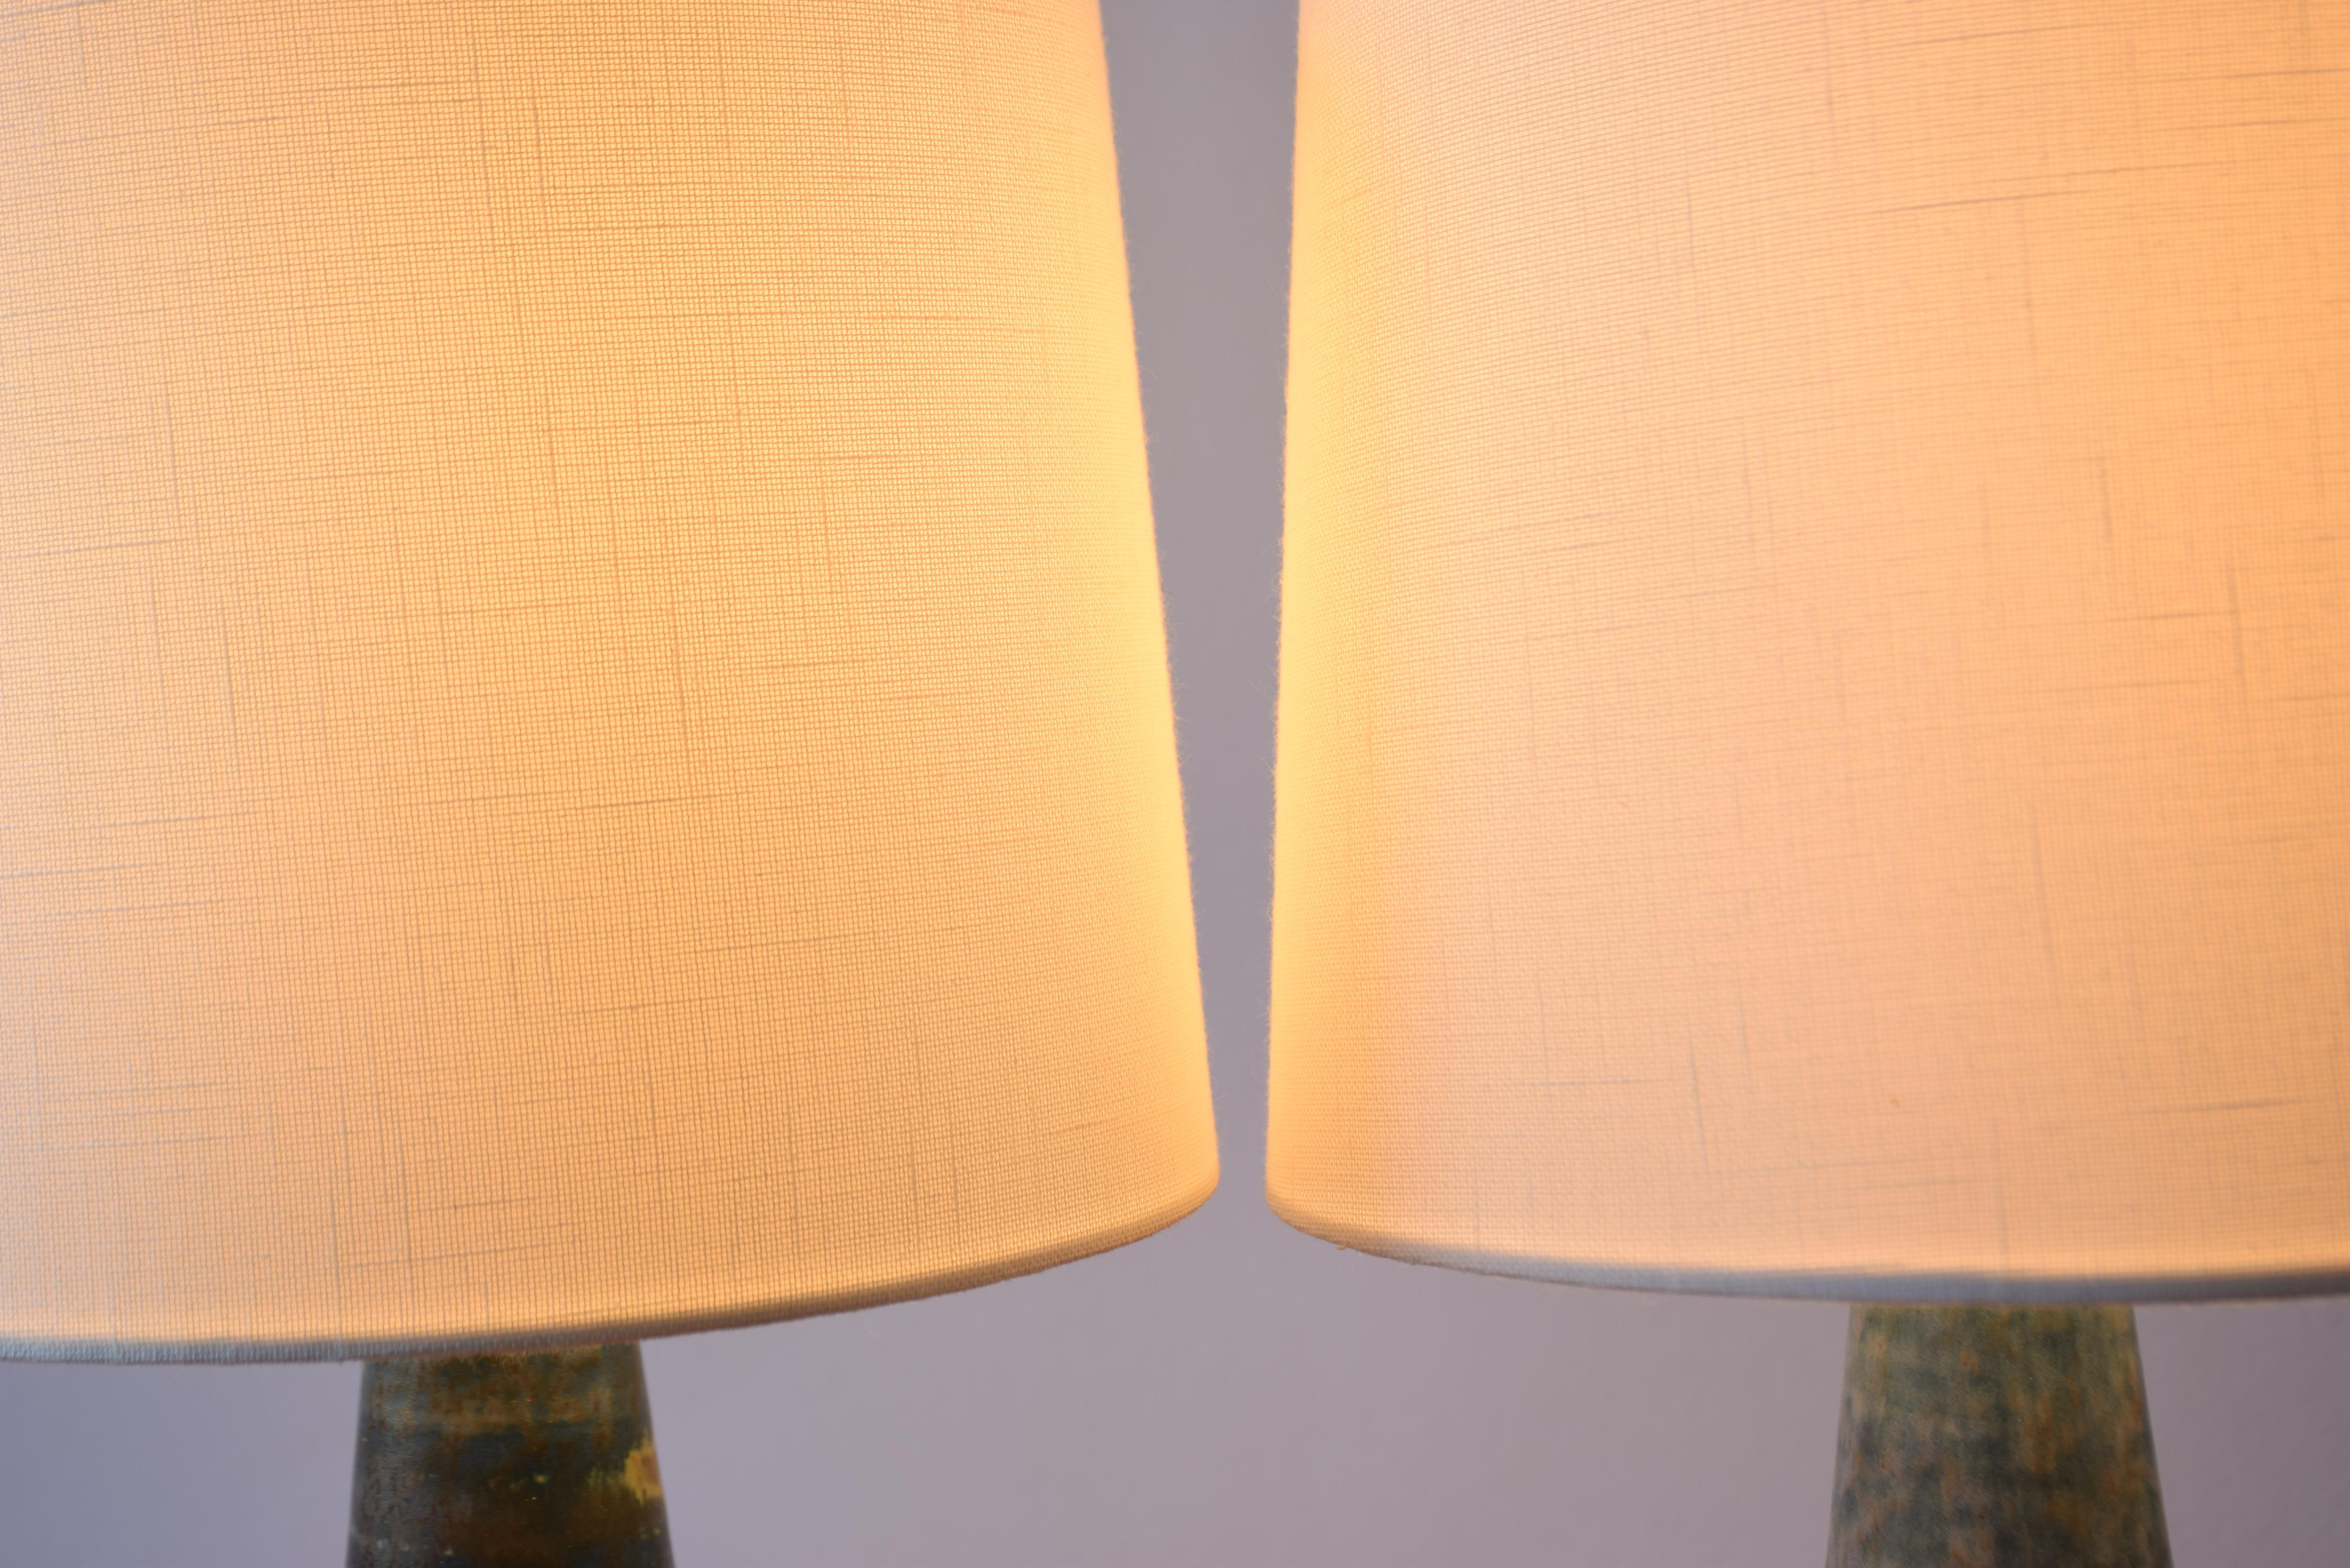 Pair of Marianne Starck for Michael Andersen Table Lamps Blue Gray, Danish 1960s For Sale 3